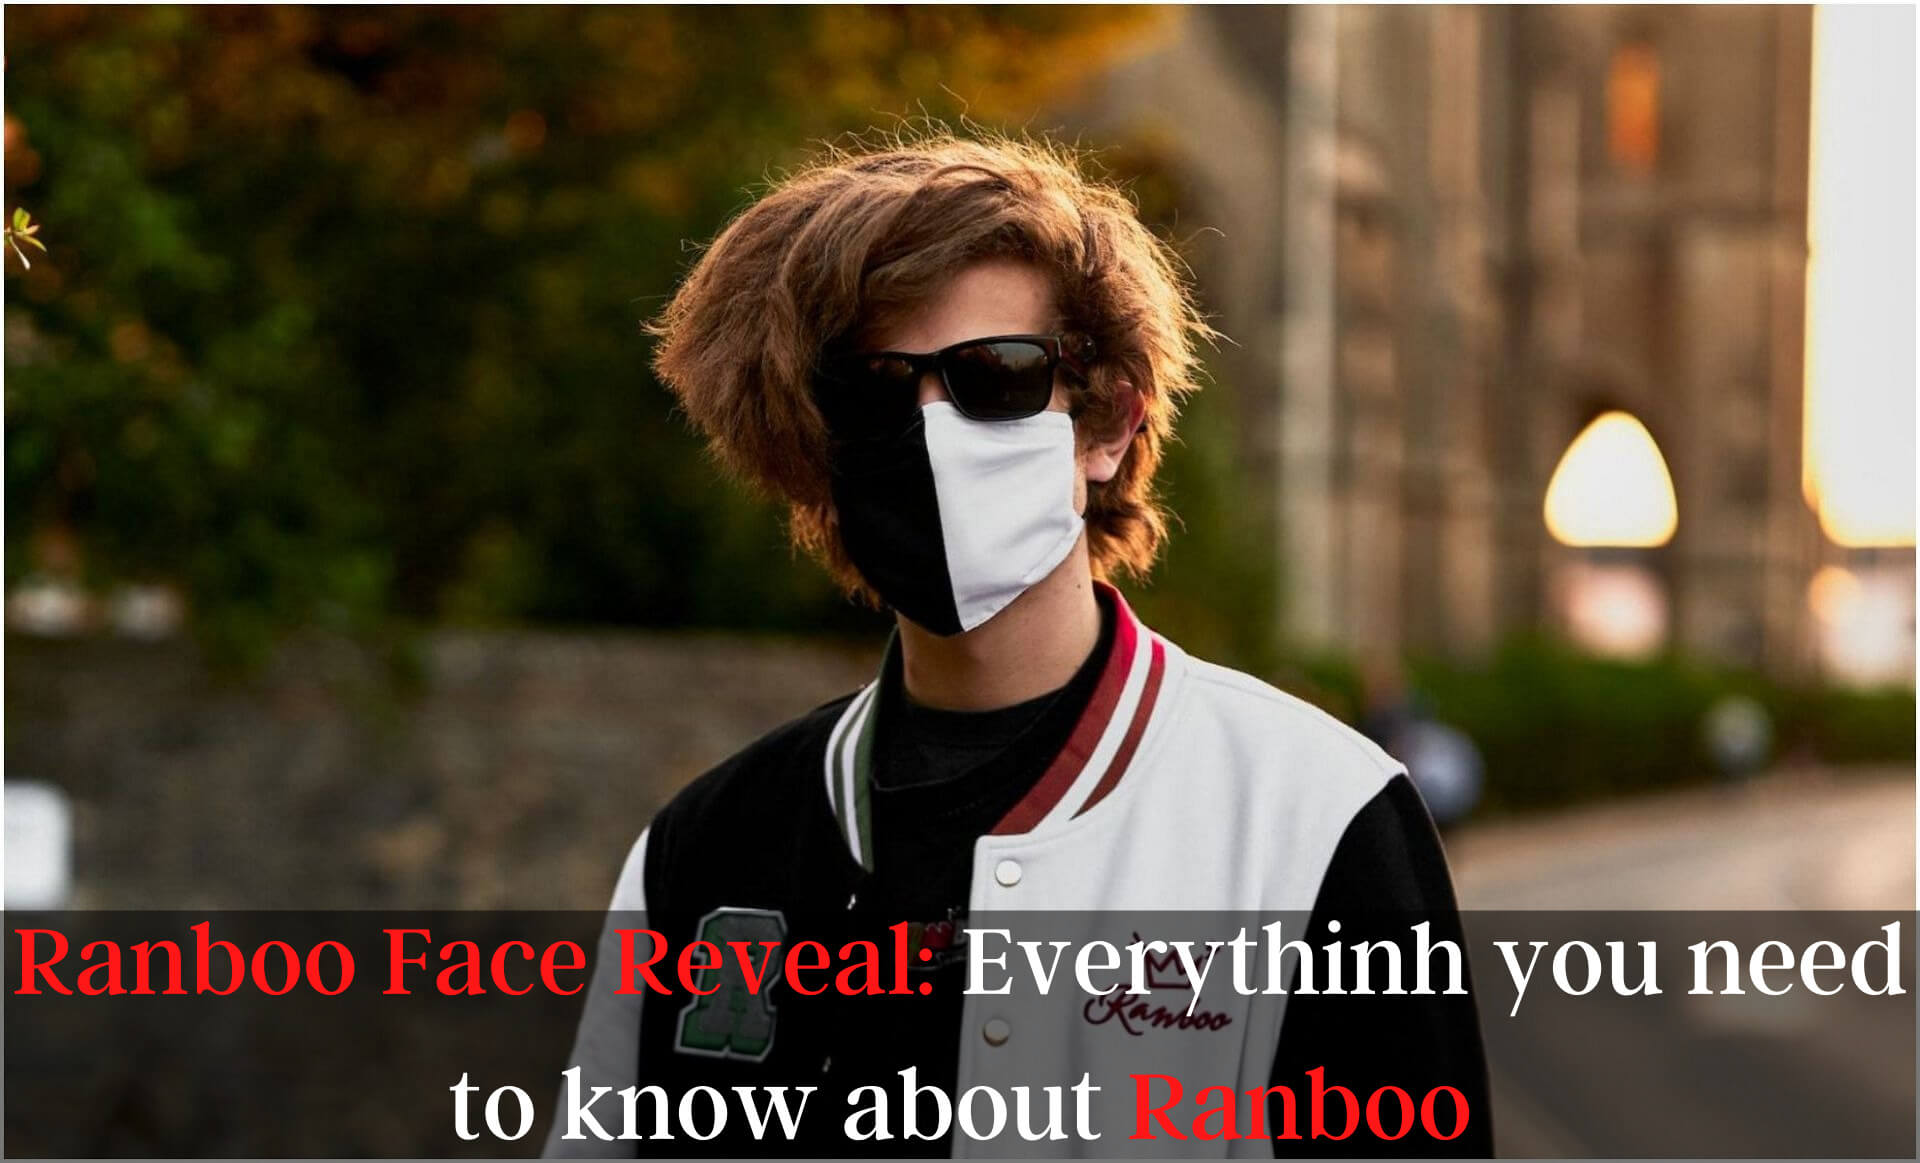 Ranboo Face Reveal Everythinh you need to know about Ranboo